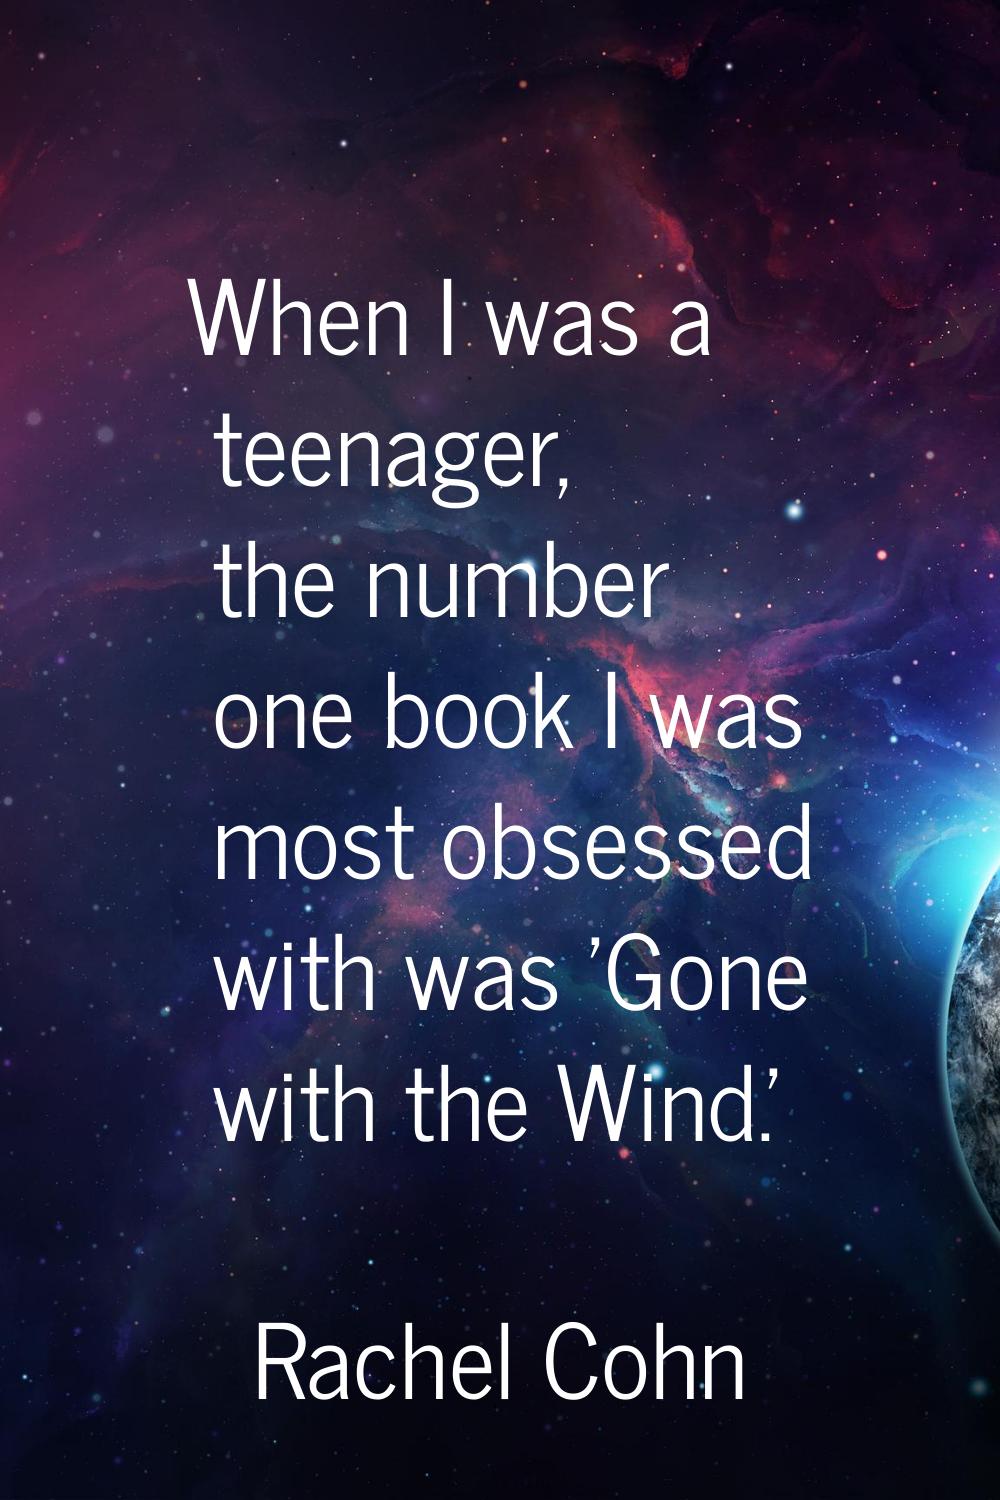 When I was a teenager, the number one book I was most obsessed with was 'Gone with the Wind.'